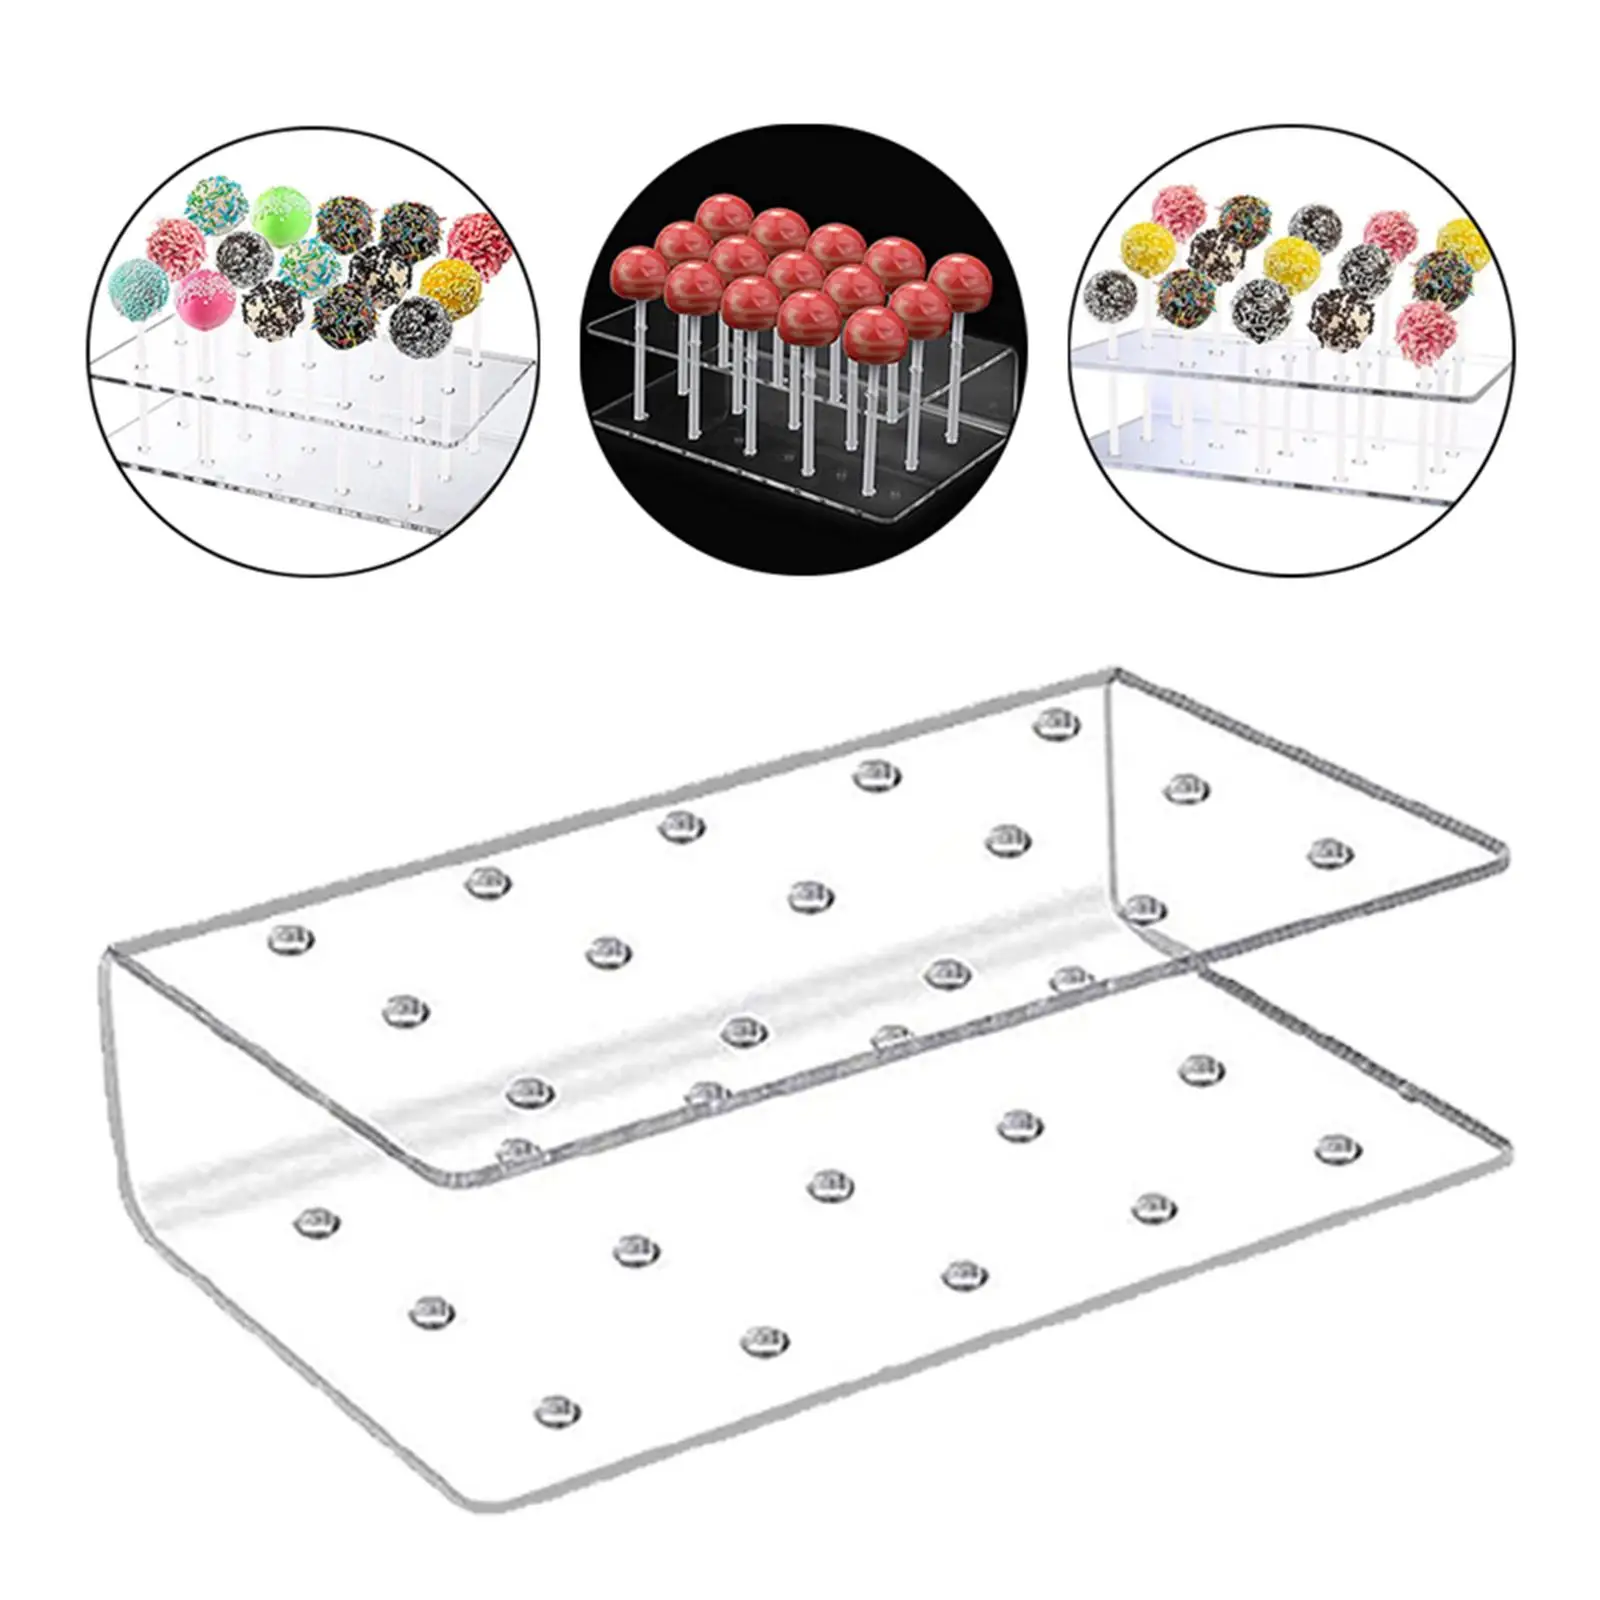 15 Holes Acrylic Lollipop Display Stand Acrylic Rectangle Shape Durable Display Holder Wedding Party Candy Dessert Stick Holder